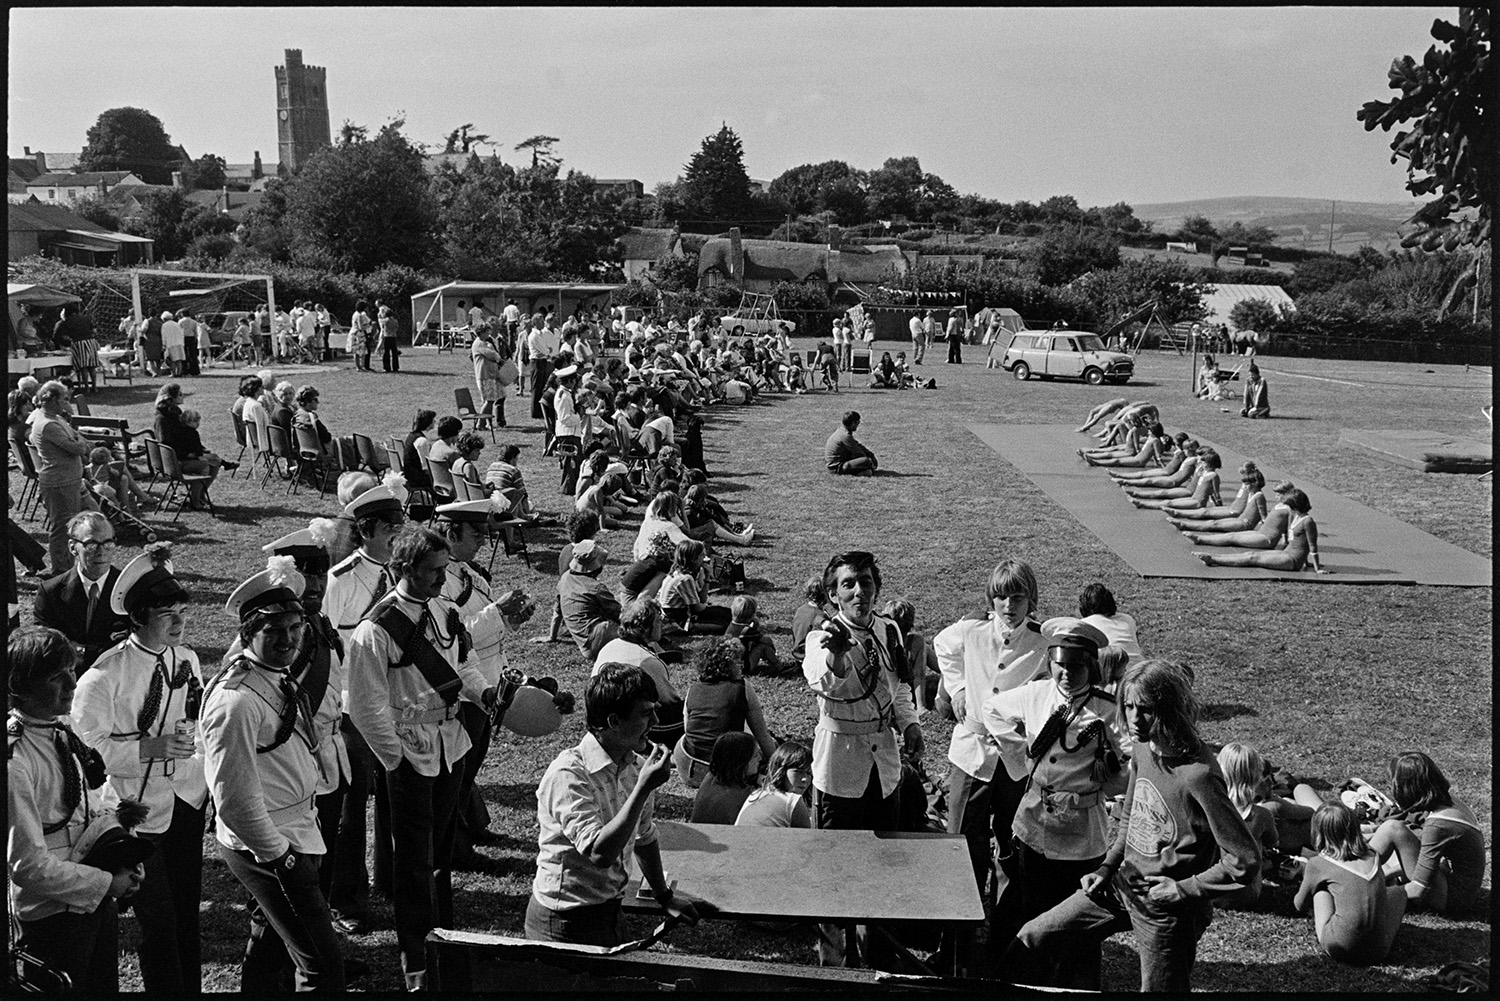 Gymnasts at fete. 
[Gymnasts performing at Atherington Village fete. A crowd is watching them. In the foreground bandsmen can be seen playing a game of darts.]